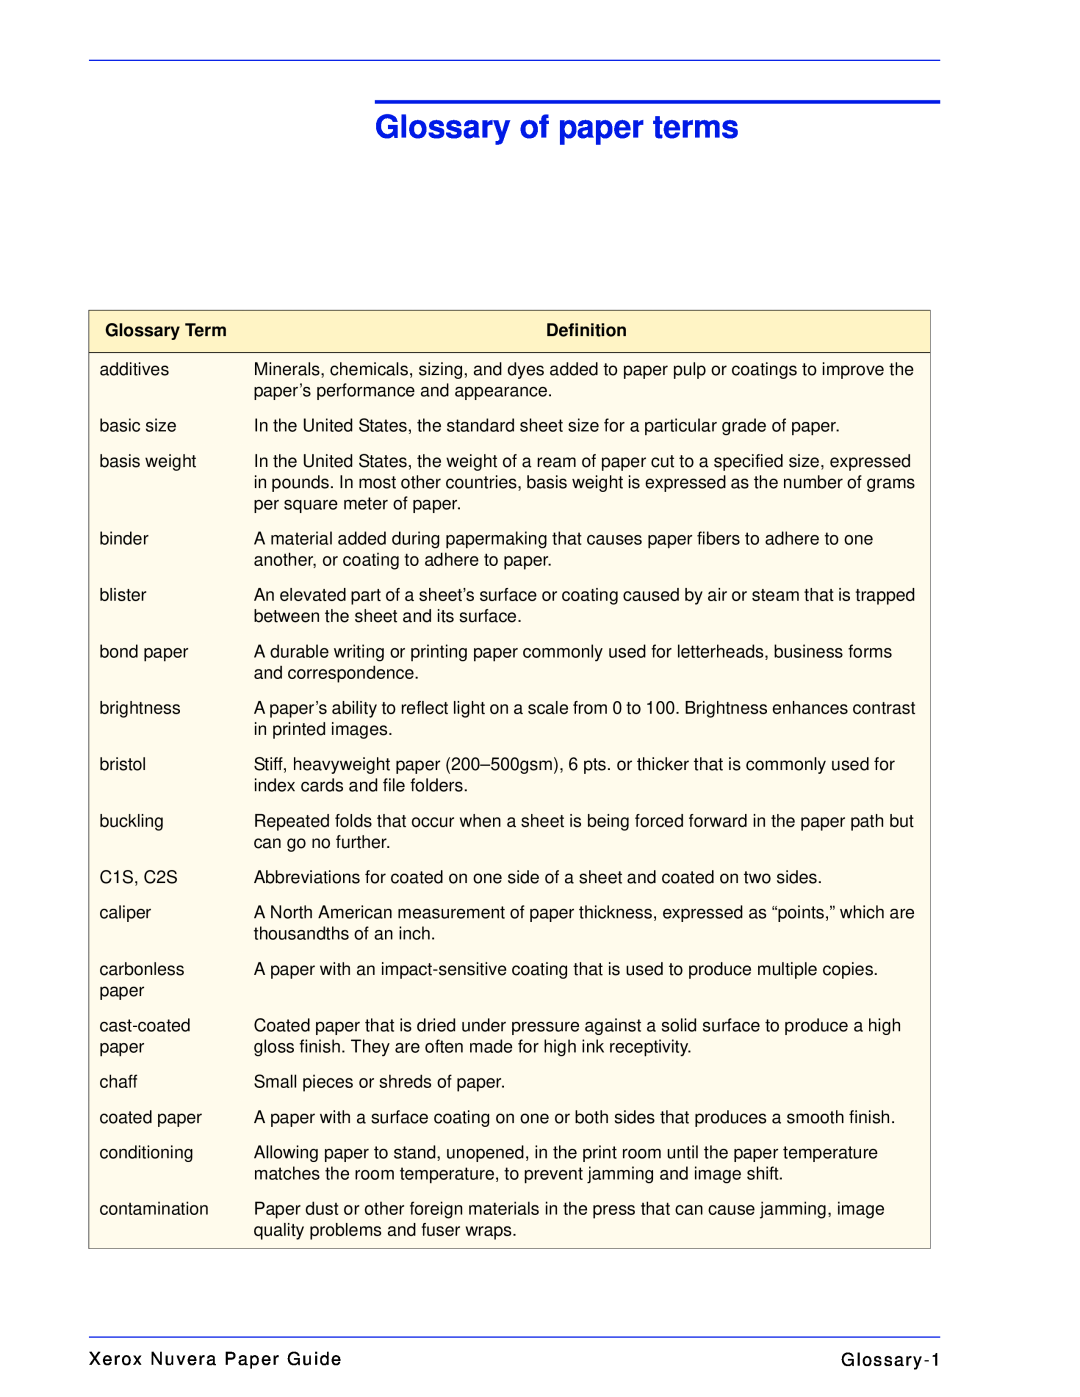 Xerox 701P28020 manual Glossary of paper terms, Glossary Term, Definition 